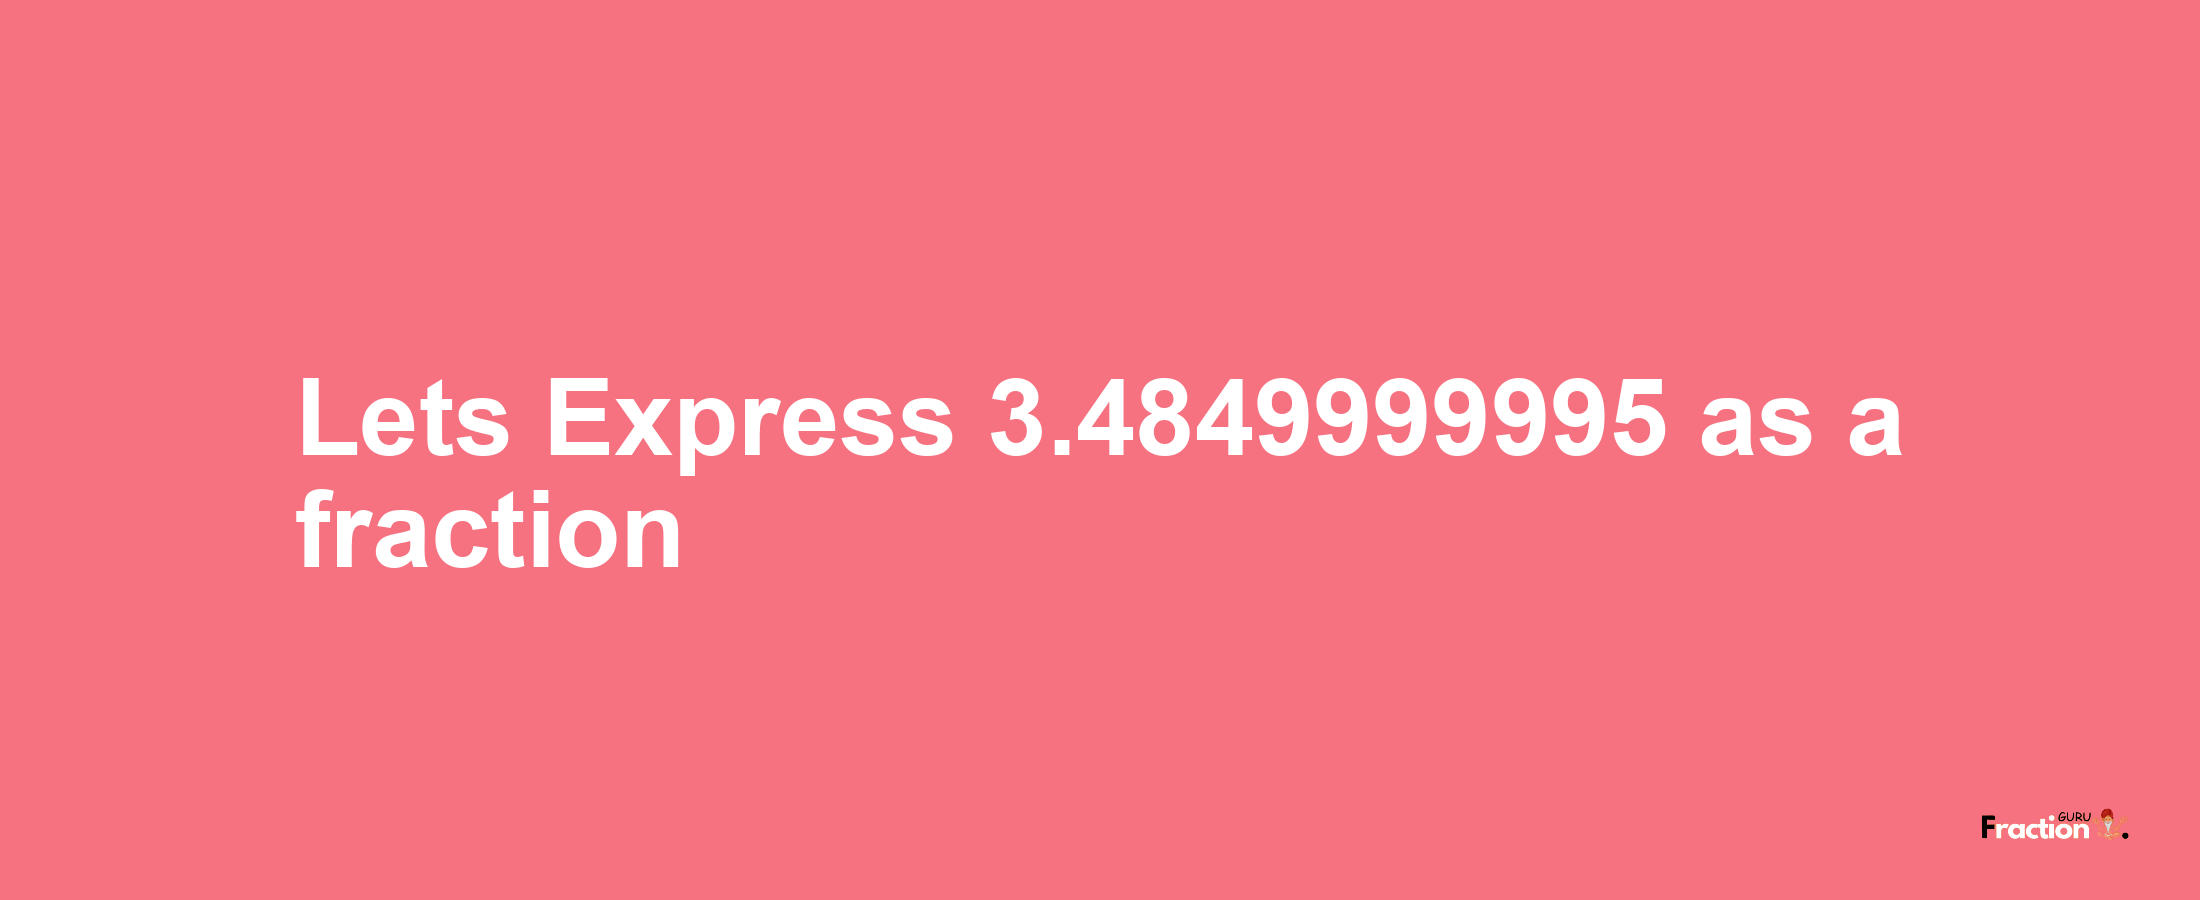 Lets Express 3.4849999995 as afraction